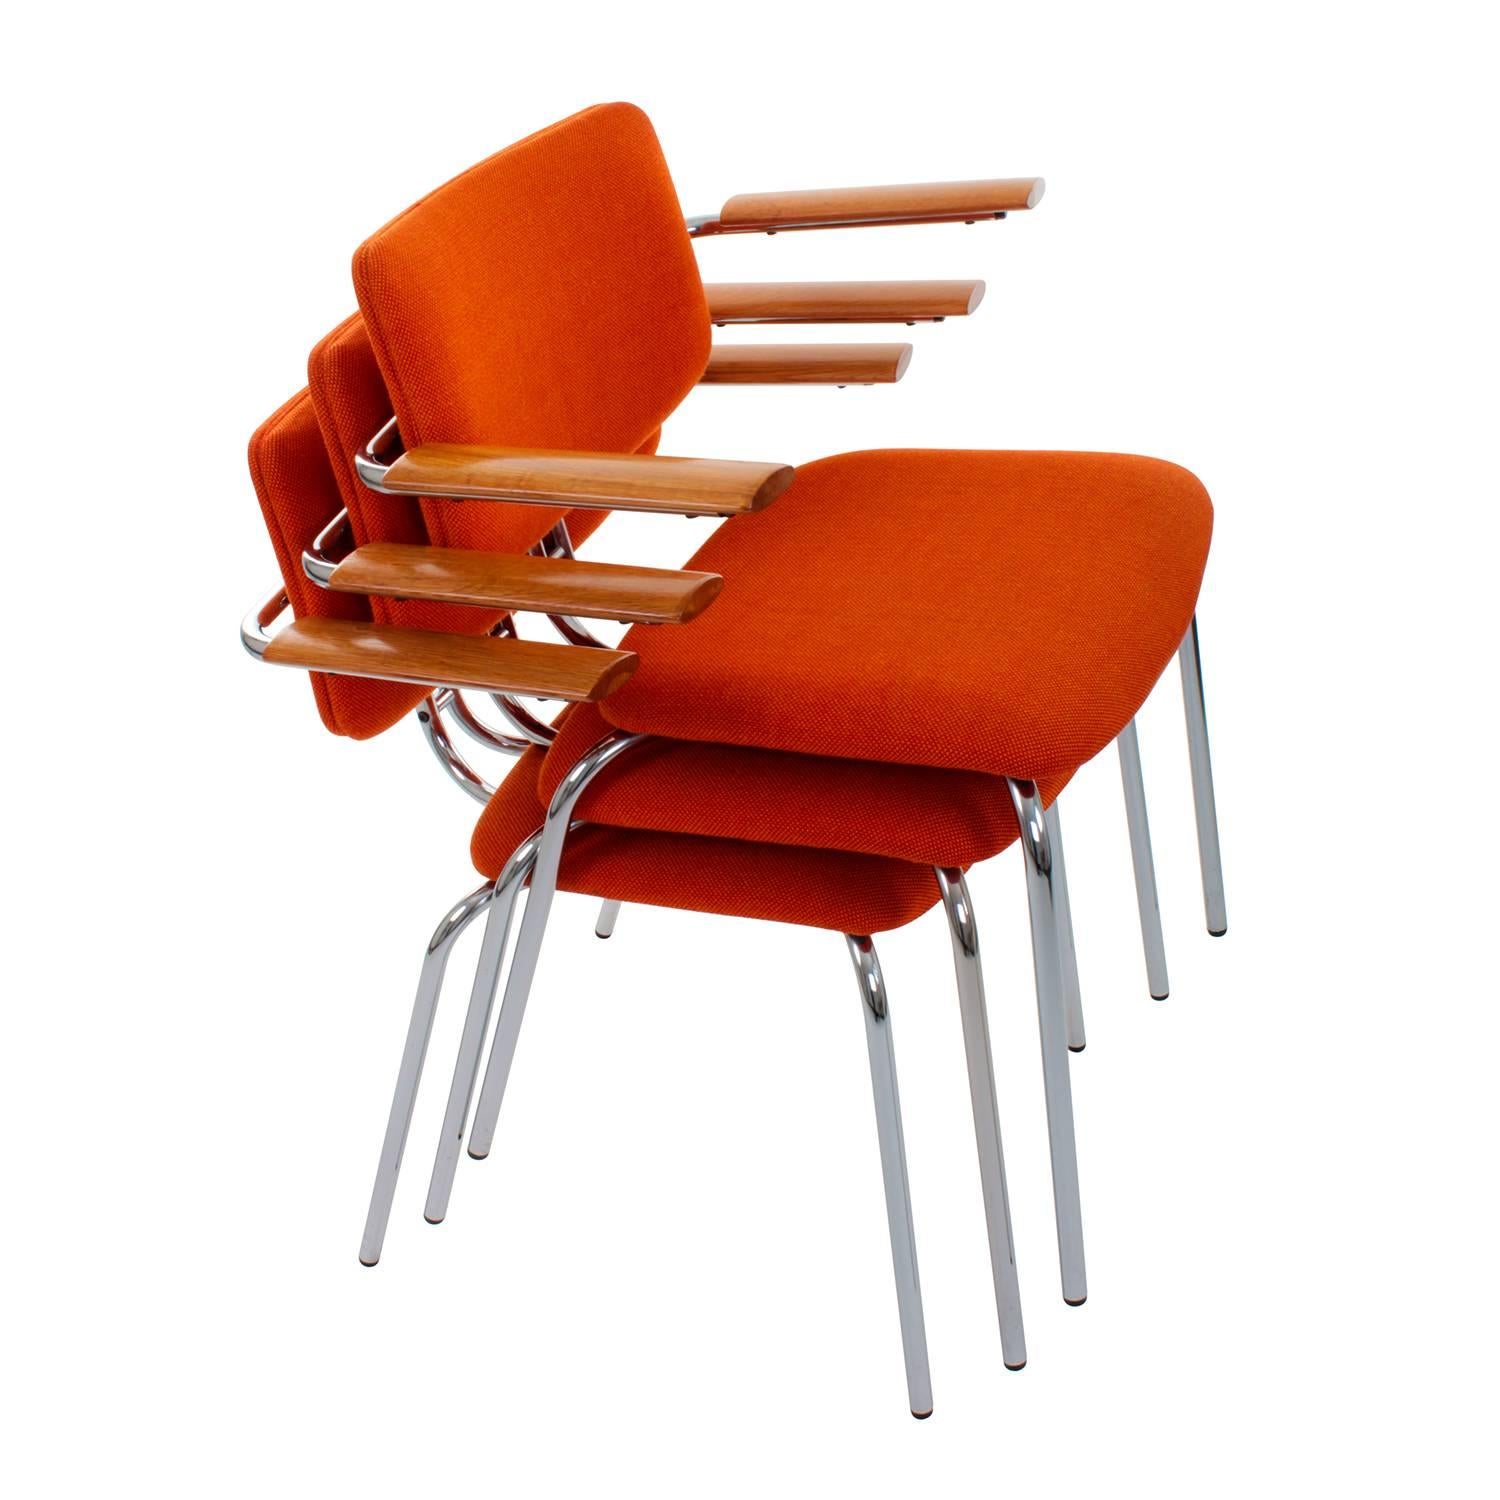 Beech Chair by Duba, 1980s, Danish Modernist Dining Chair with Orange Upholstery For Sale